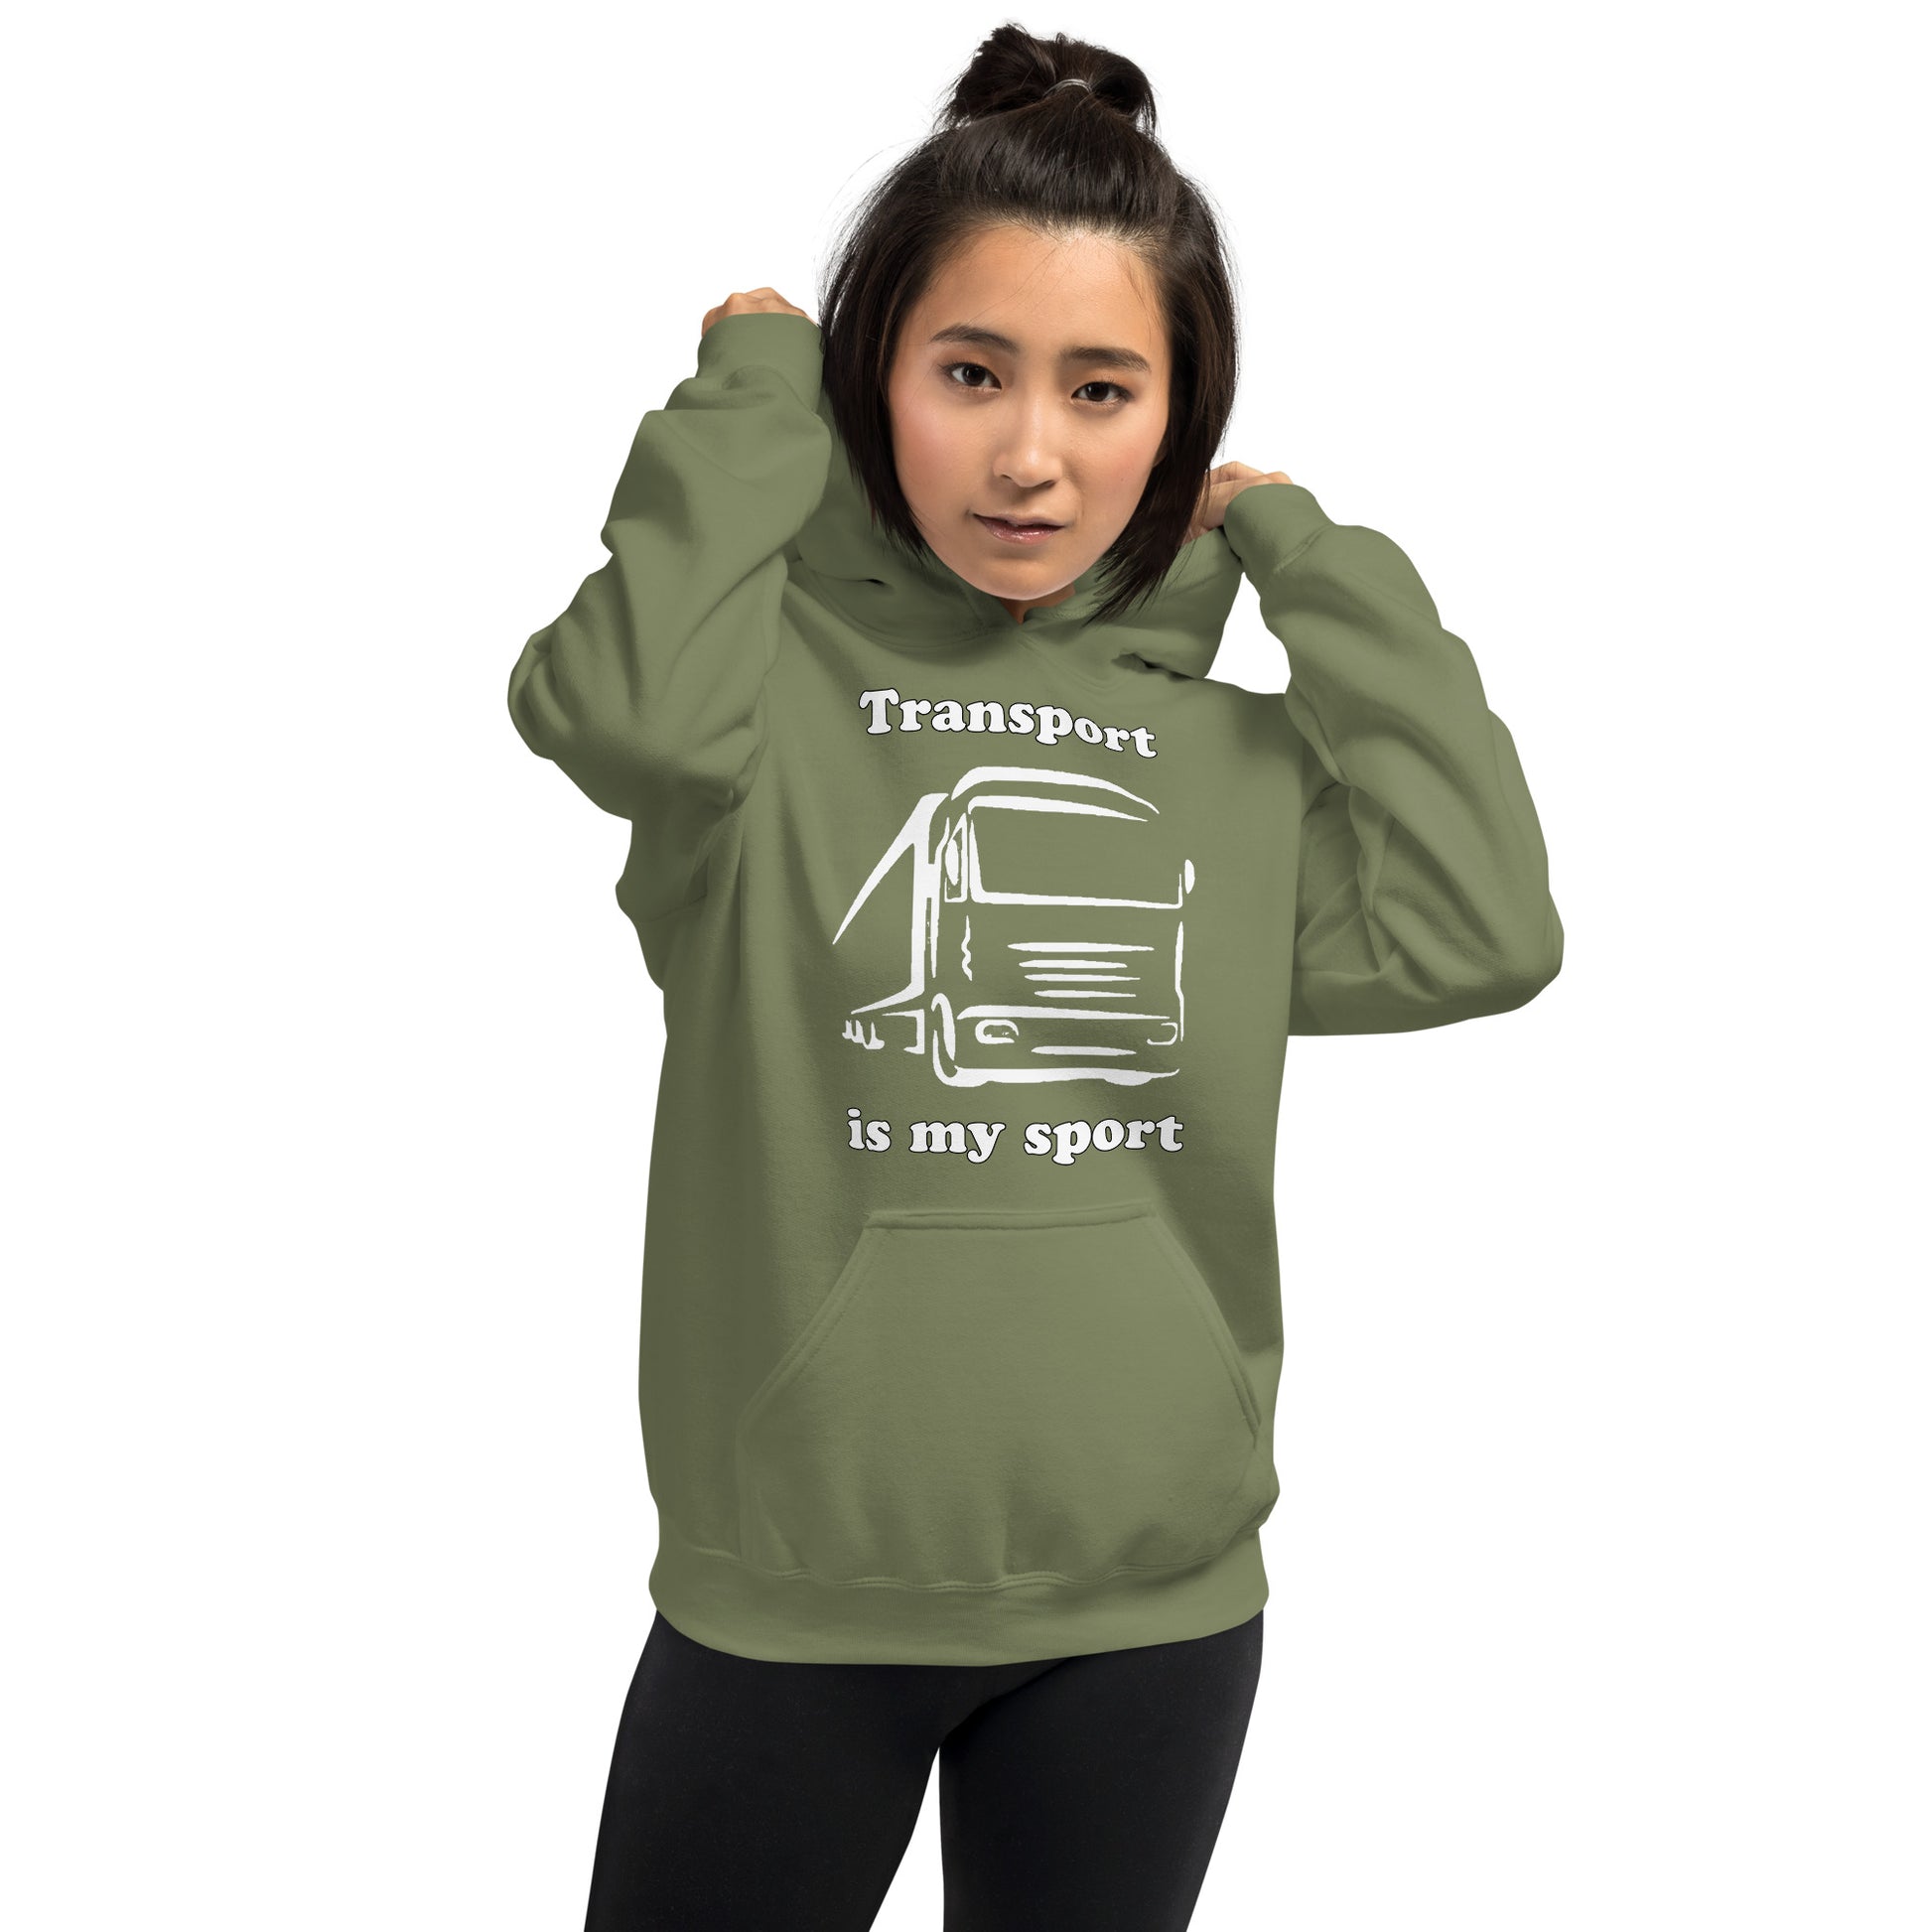 Woman with military green hoodie with picture of truck and text "Transport is my sport"